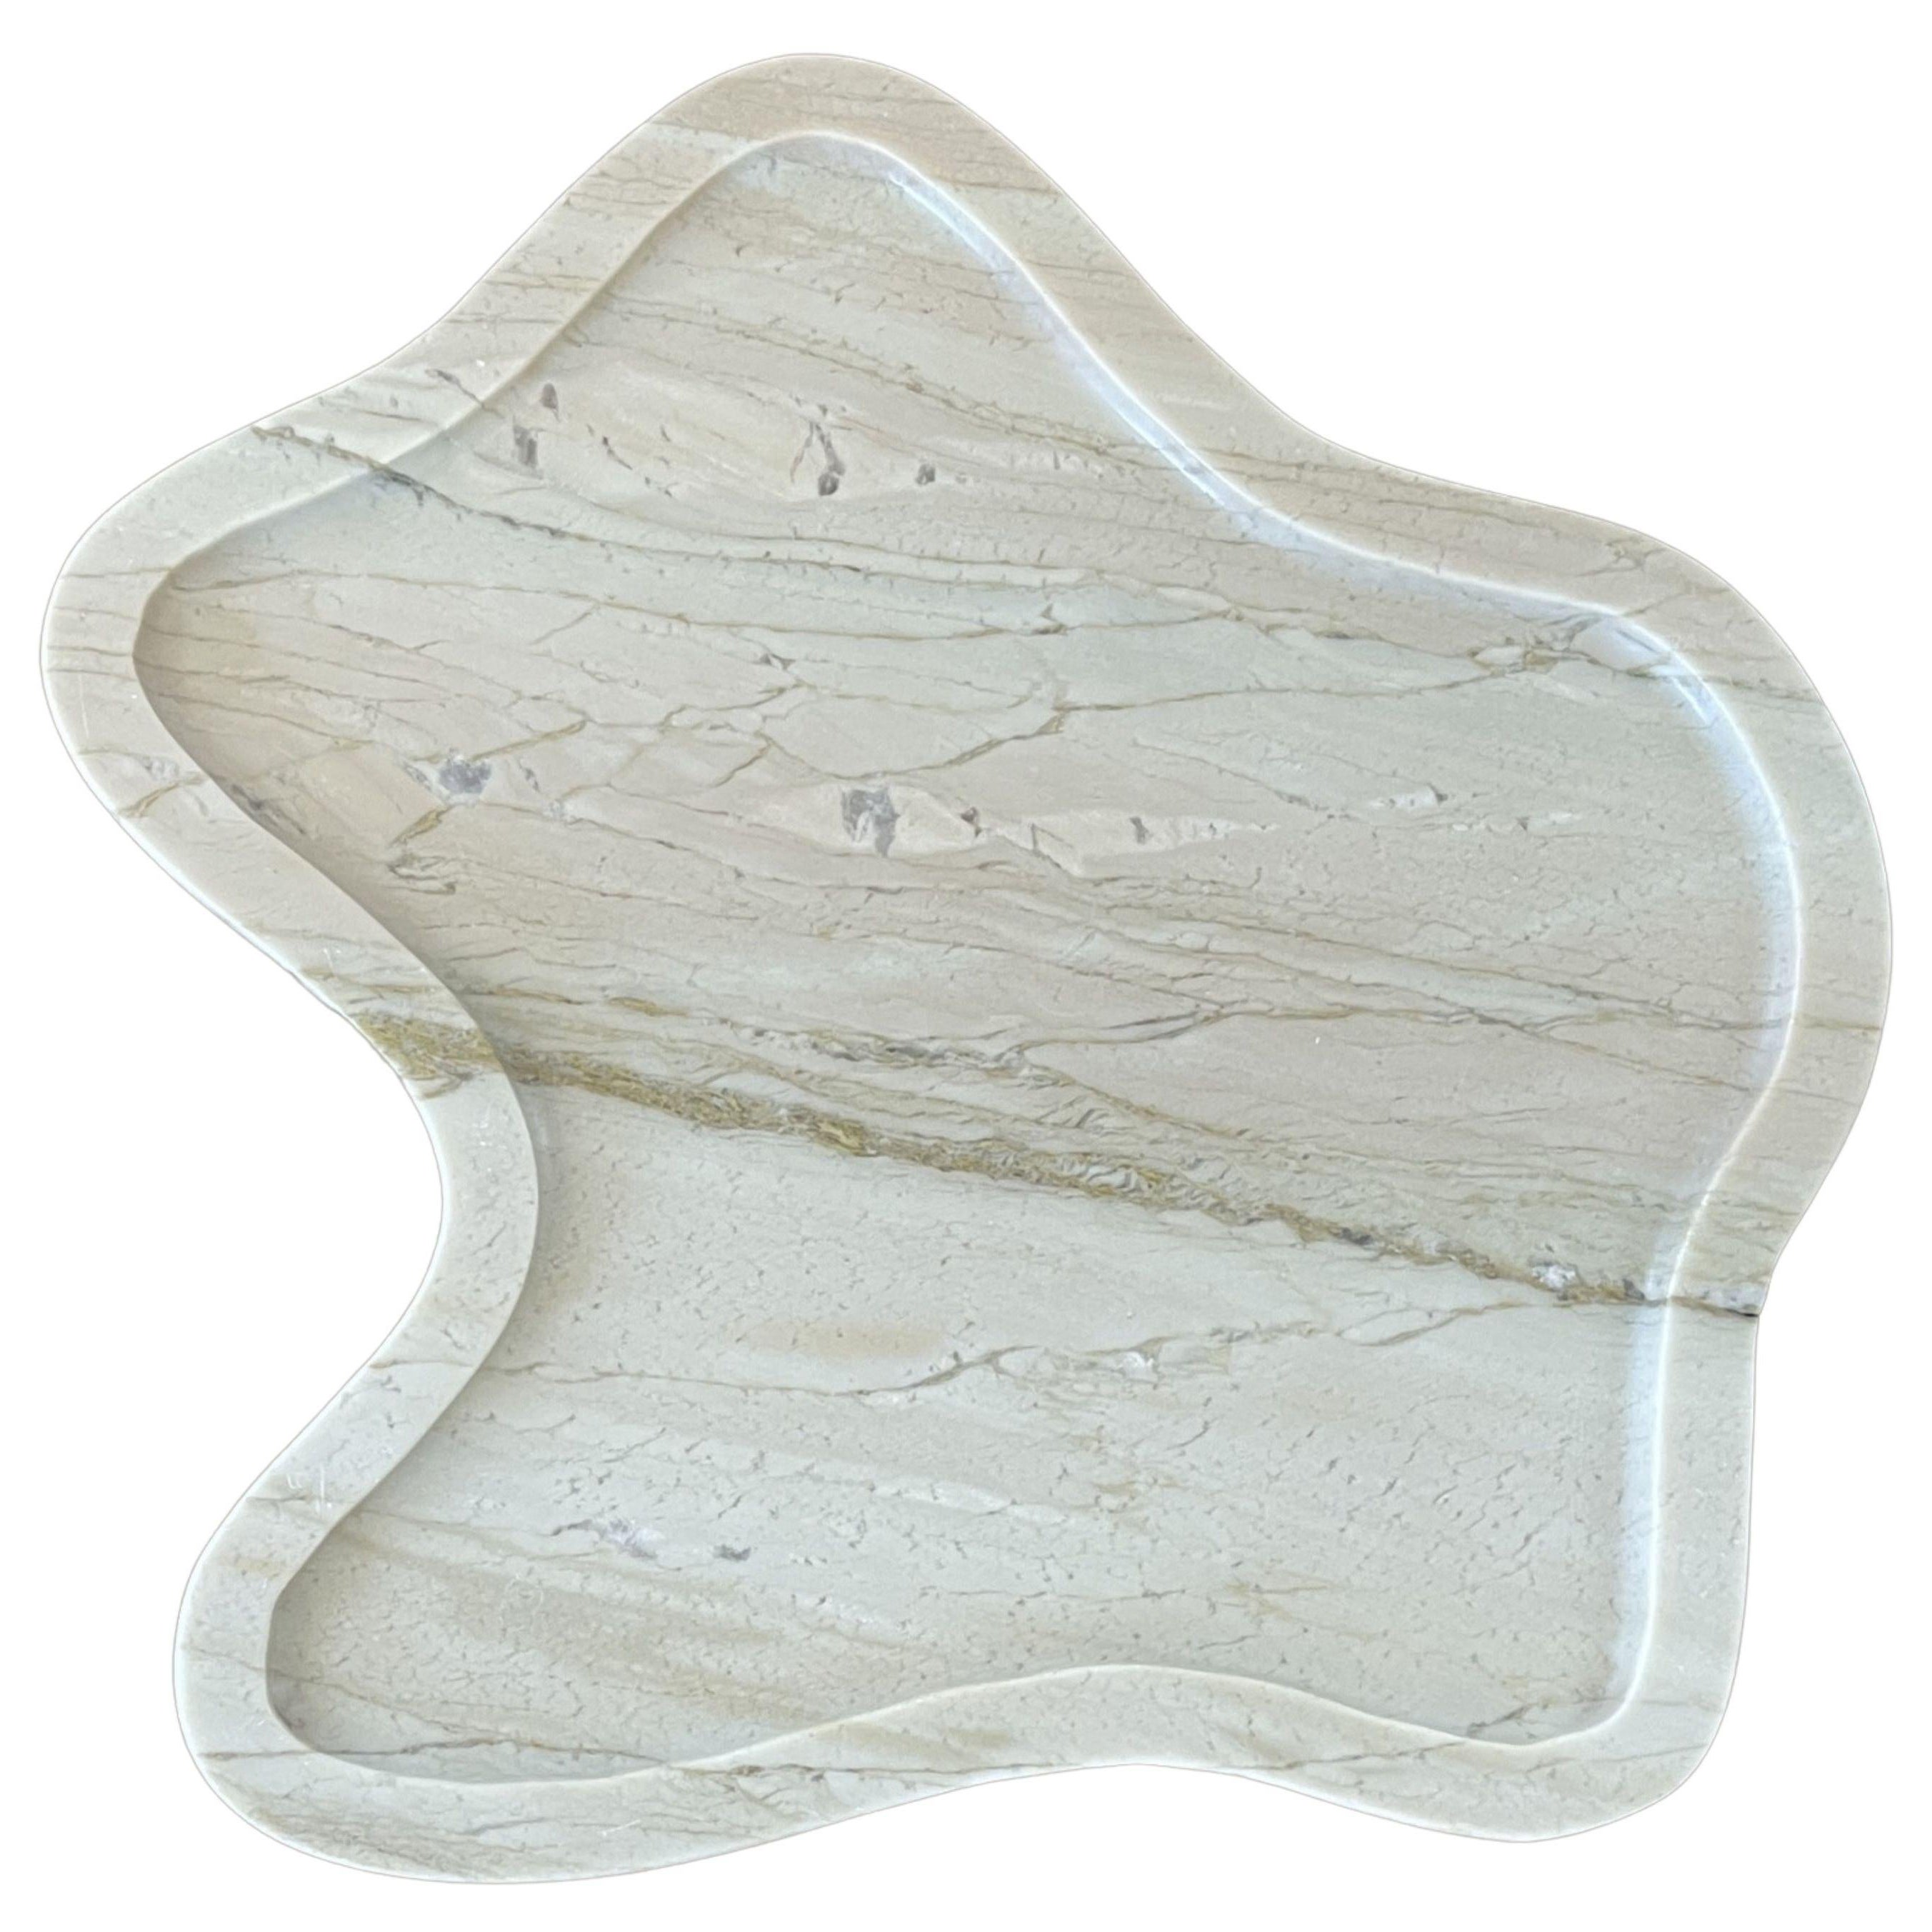 Flo Tray: Organic-shaped Tray in Matcha by Anastasio Home For Sale